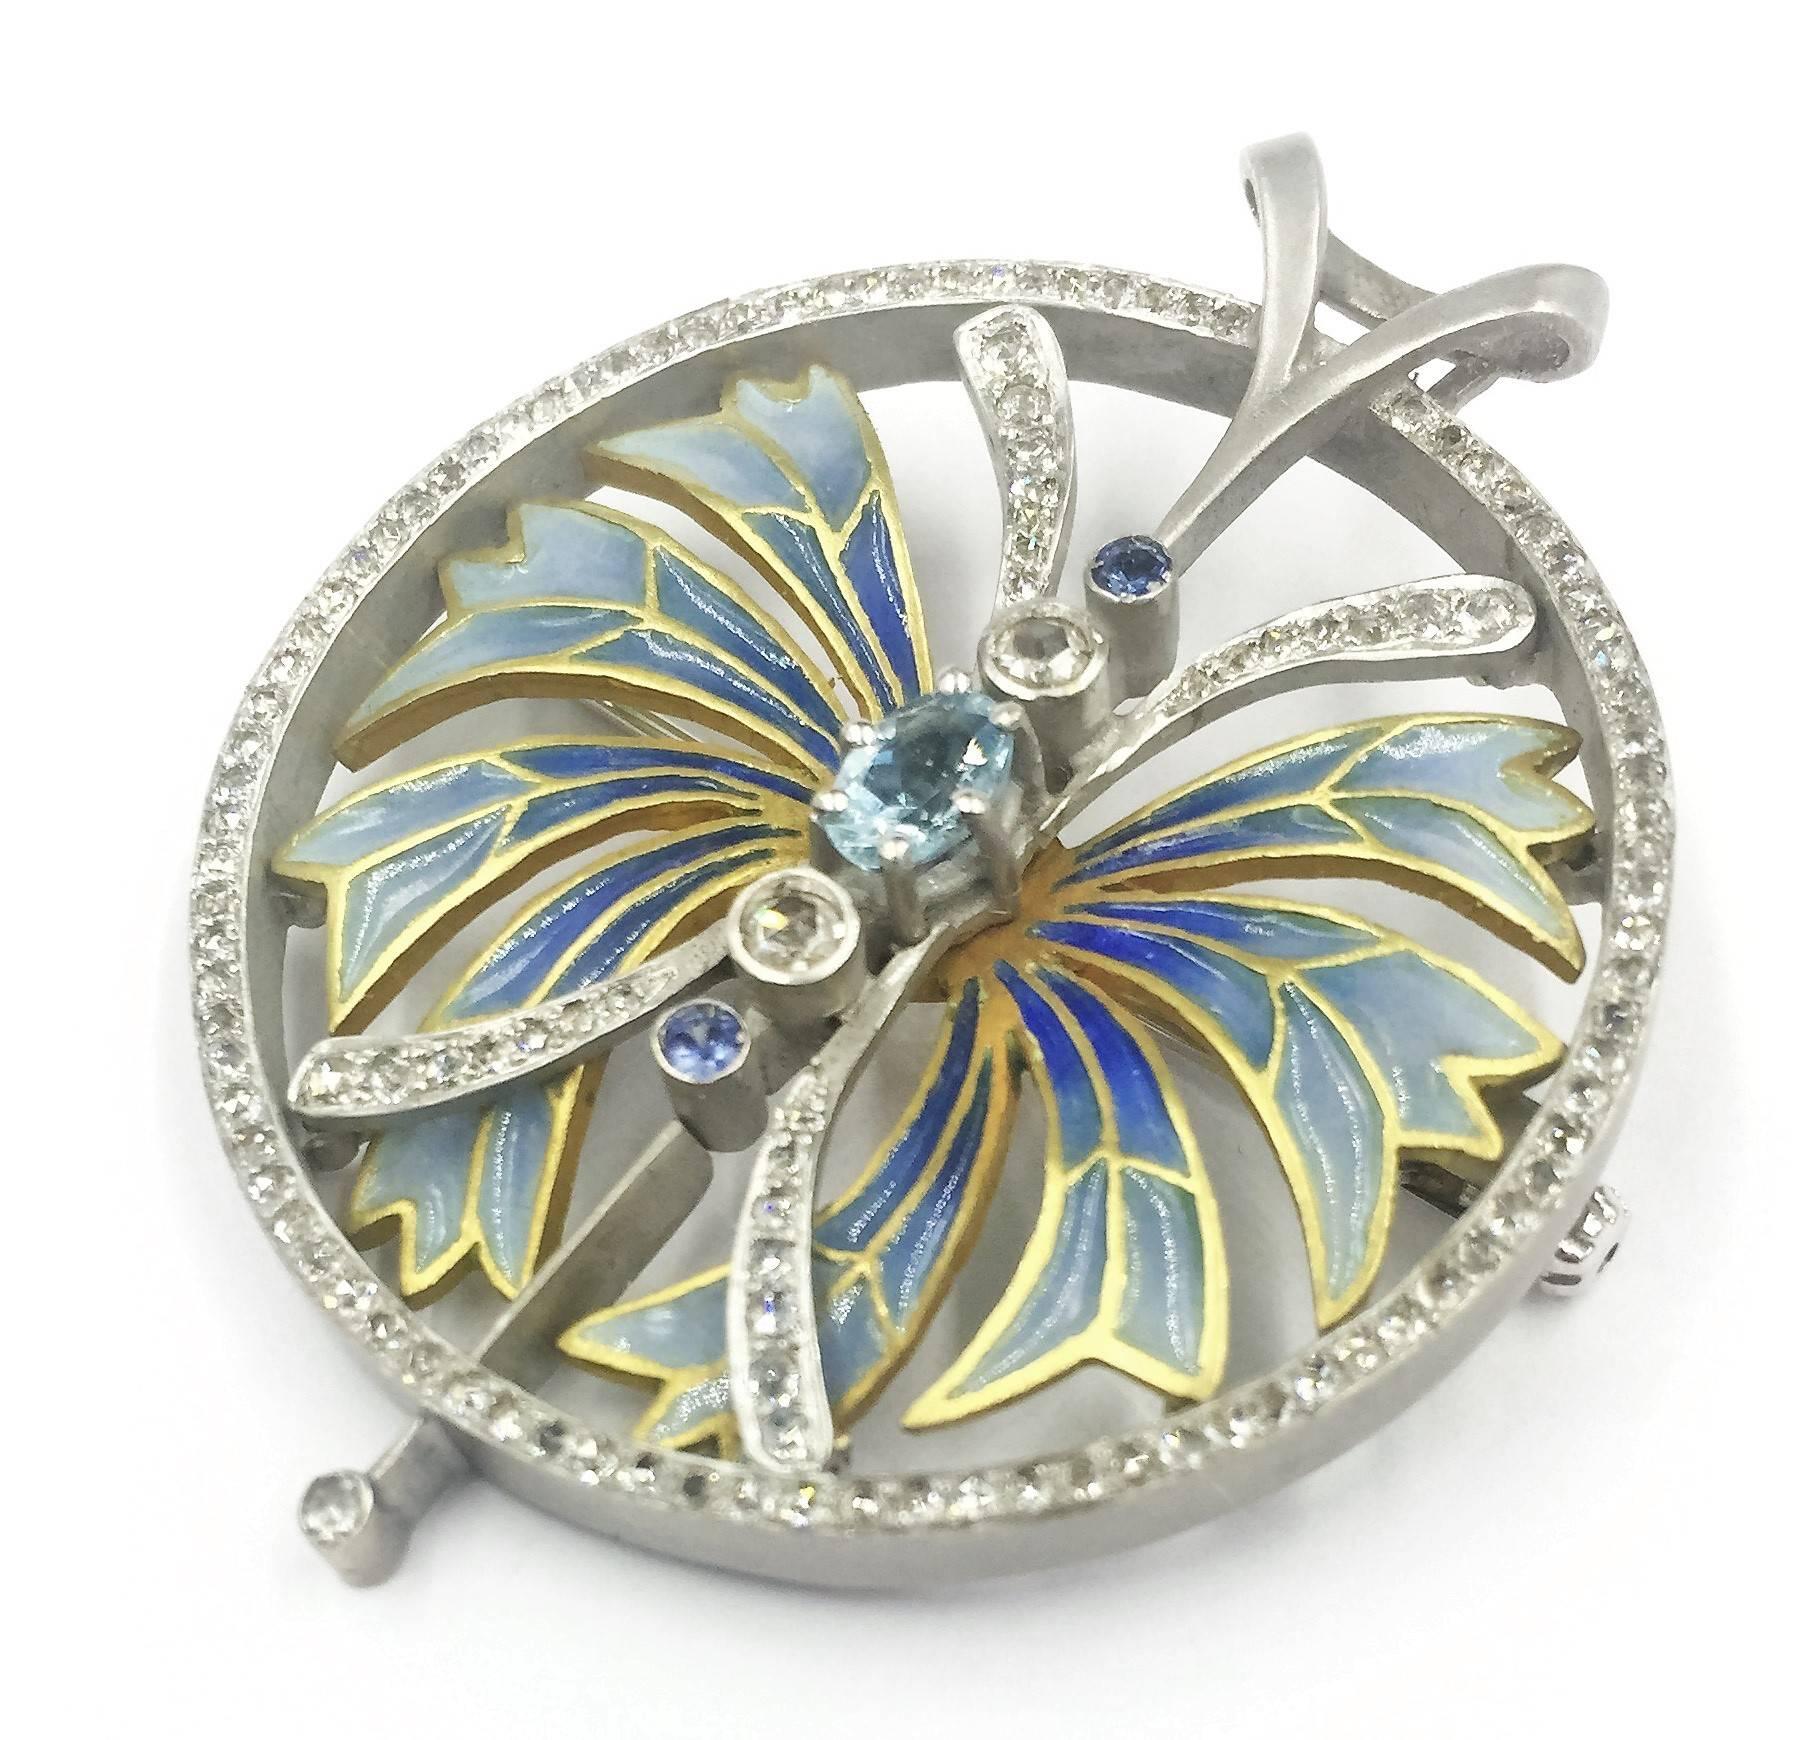  This dragonfly design and enamel work is perfect and absolutely enchanting. This brooch also features a bail on top where a chain could be easily brought through and this could be worn as a pendant with ease. A truly captivating design and modern